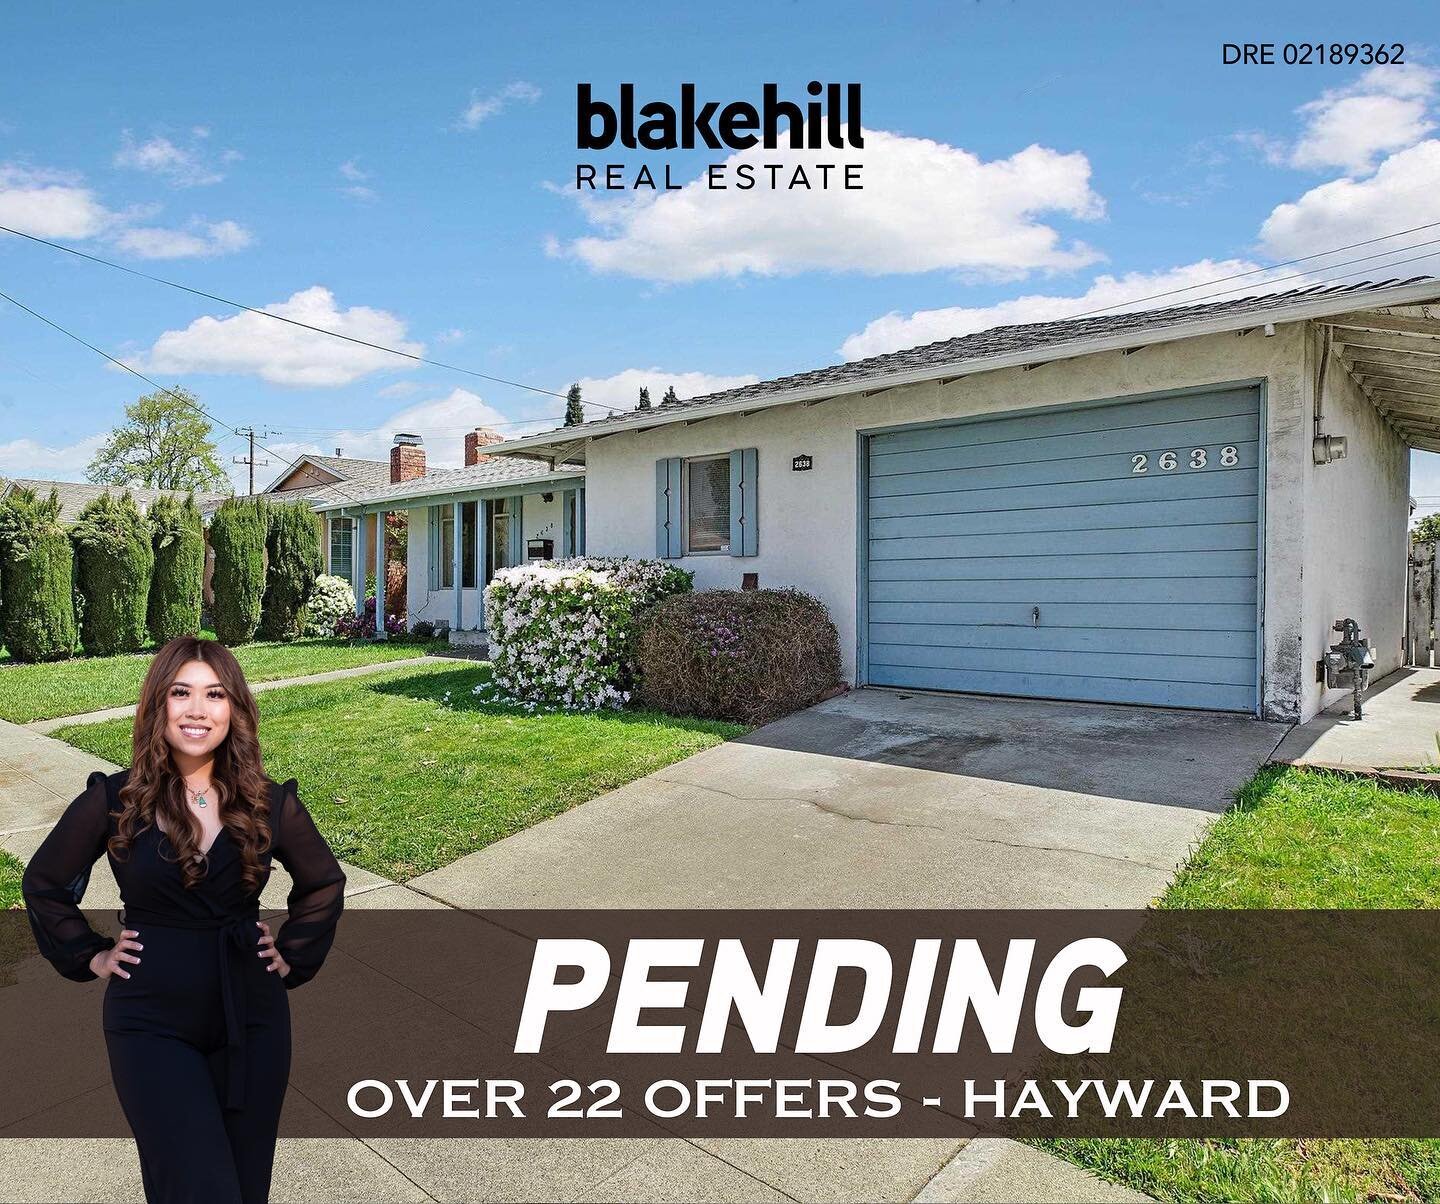 P E N D I N G 🌟 : A huge congratulations to our agent, Ashley Su! She was able to get her clients offer accepted on this Hayward home AND beat out a total of 22 other offers! 🏆 She continues to impress us everyday and we&rsquo;re blessed to have he